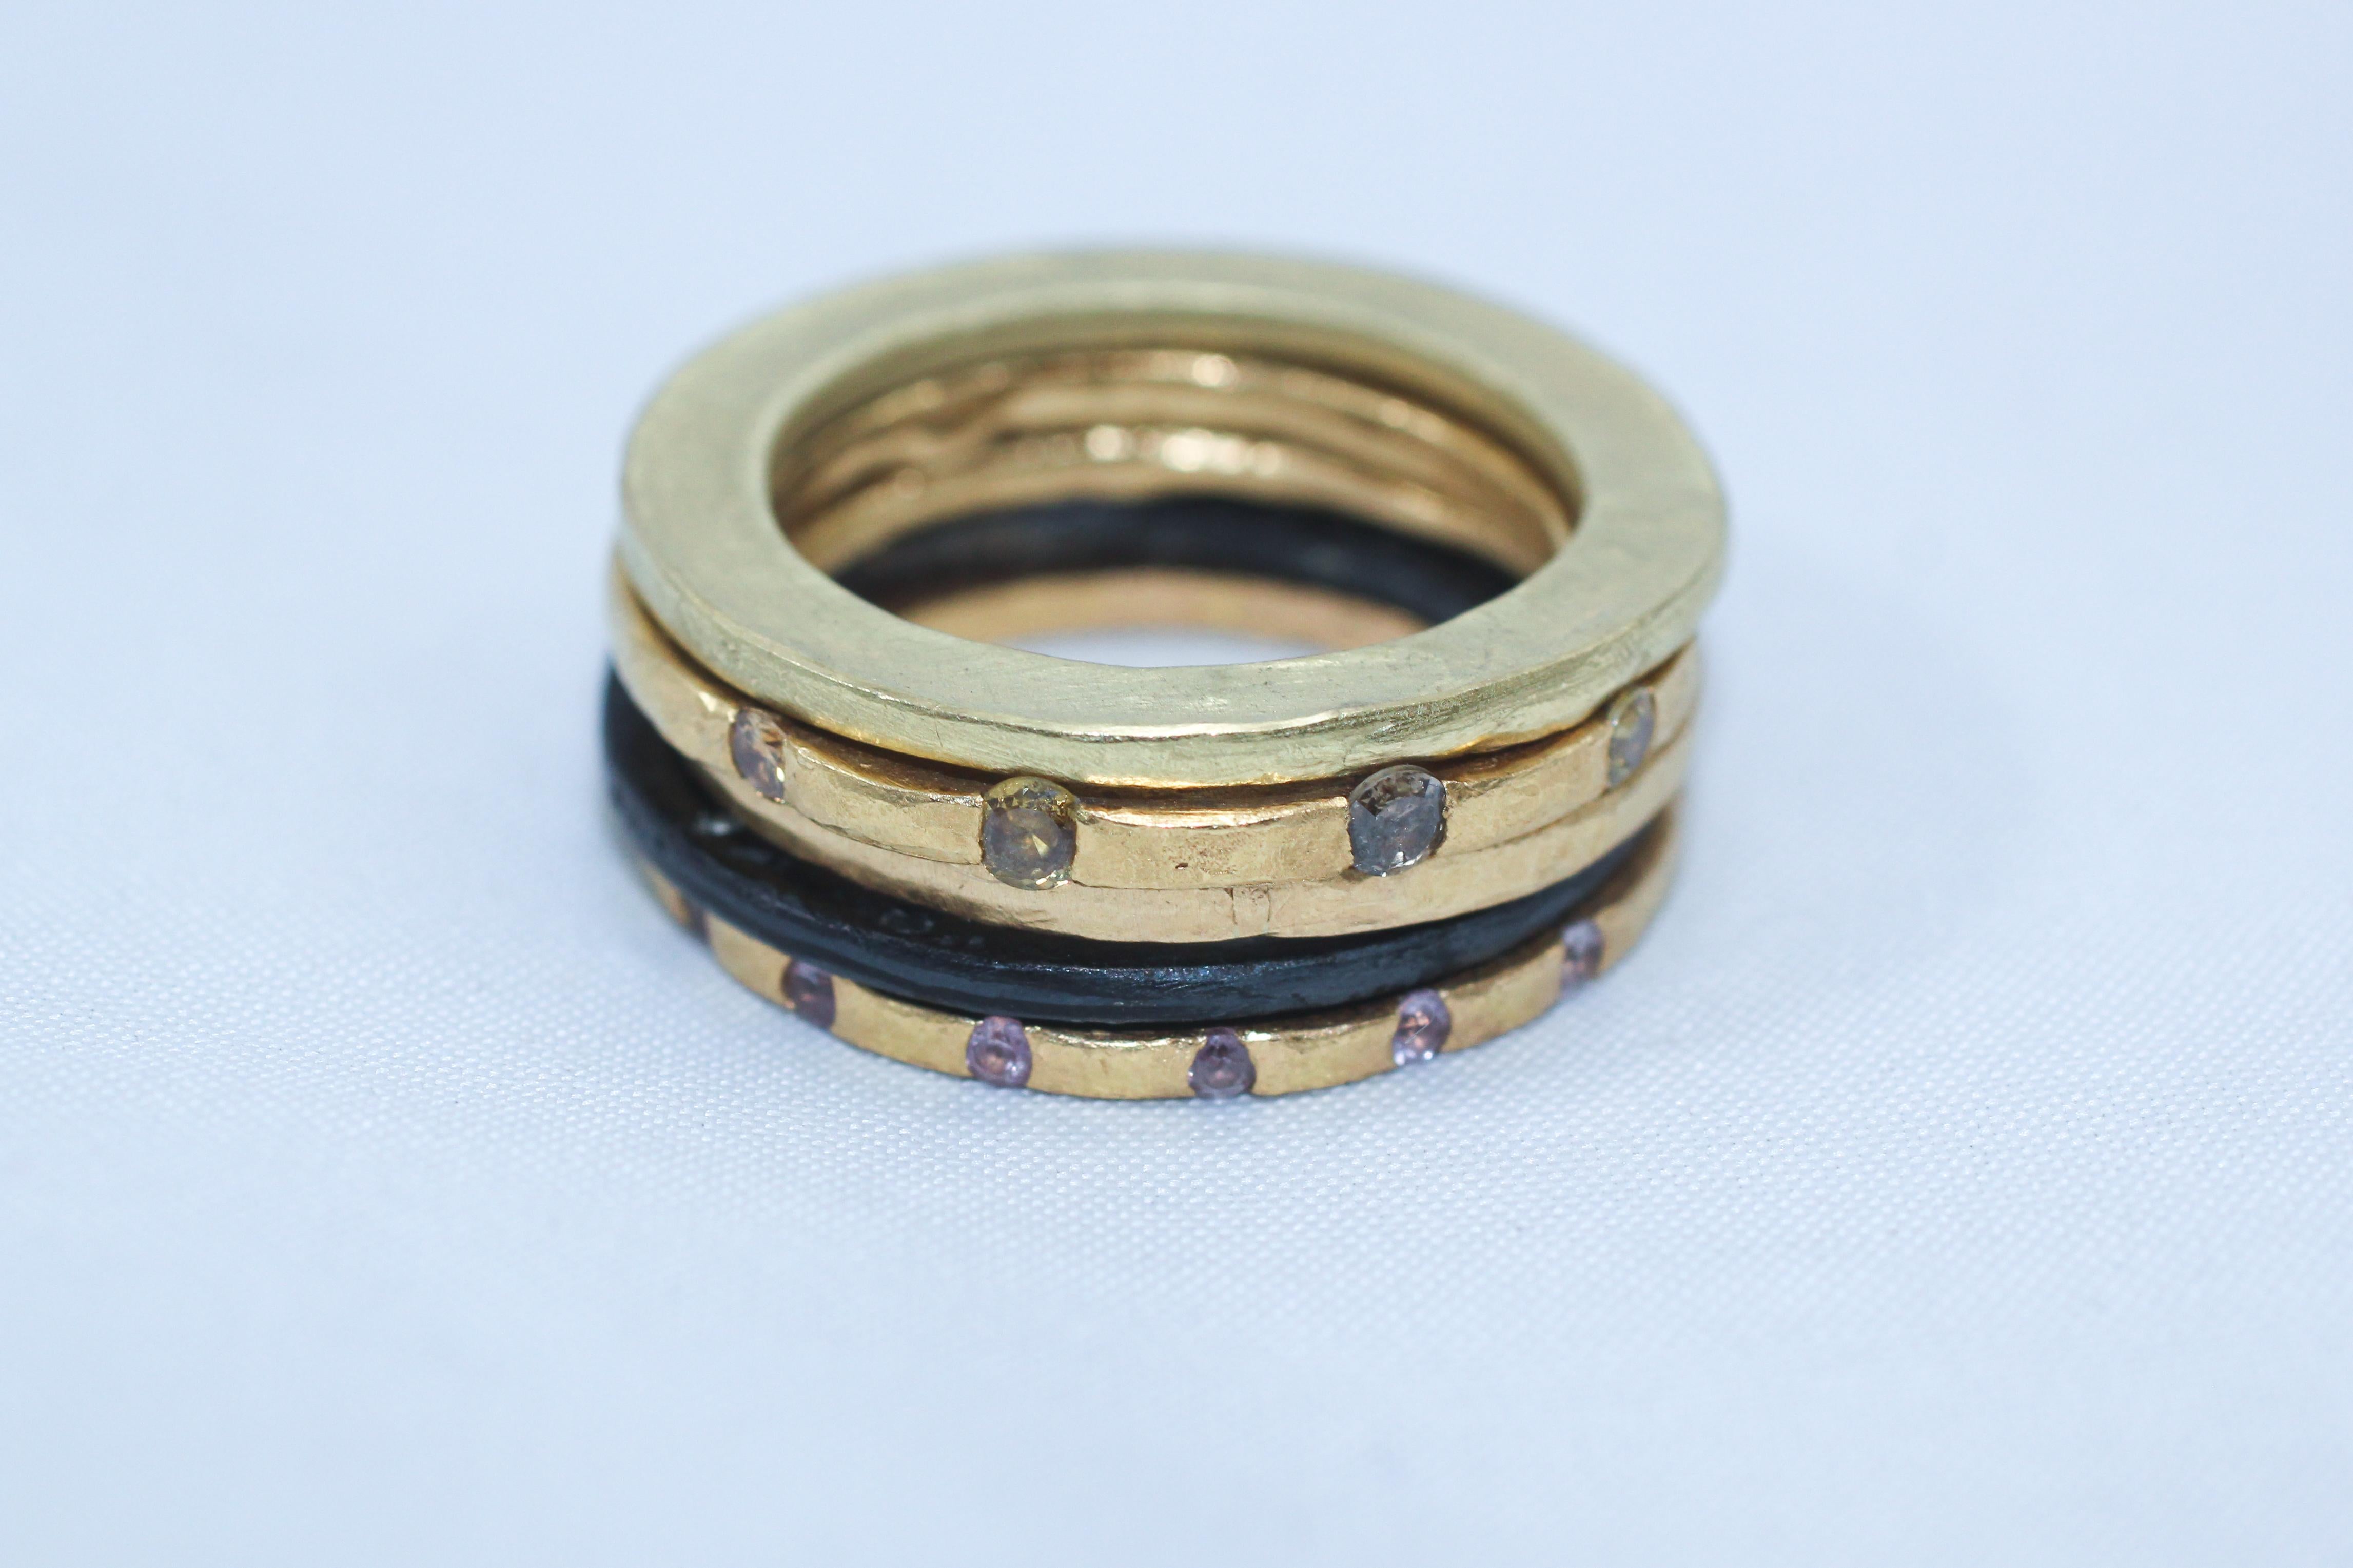 An alternative Bridal, Wedding, or Engagement Band Ring. Color diamonds and pink sapphires are set in 22k recycled gold and combined with 18k recycled gold and sterling silver rings. Simplicity Stack #5 design.

These striking wedding or engagement